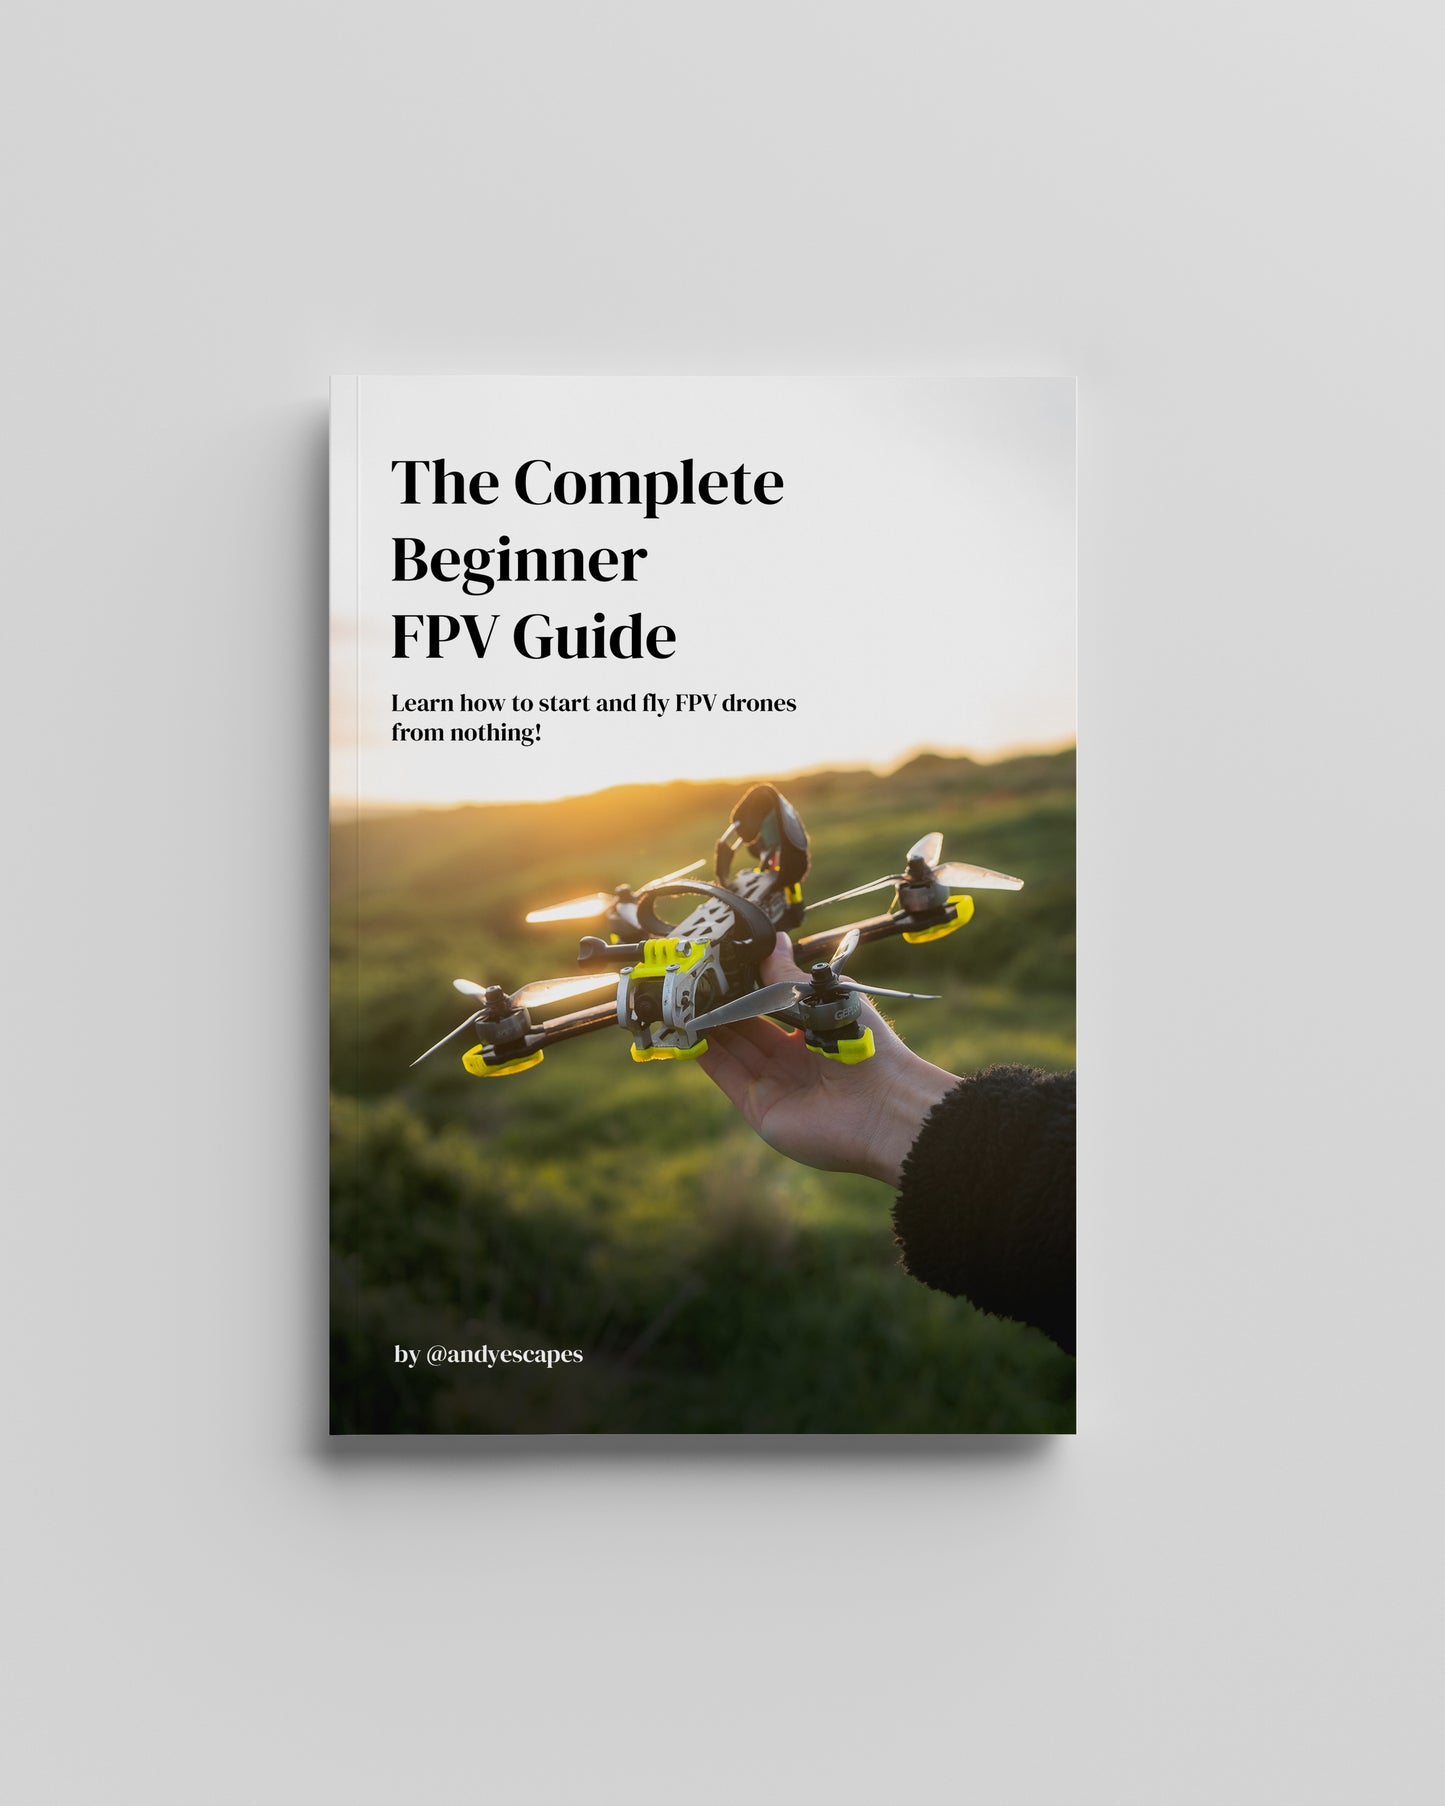 The Complete Beginner FPV Guide